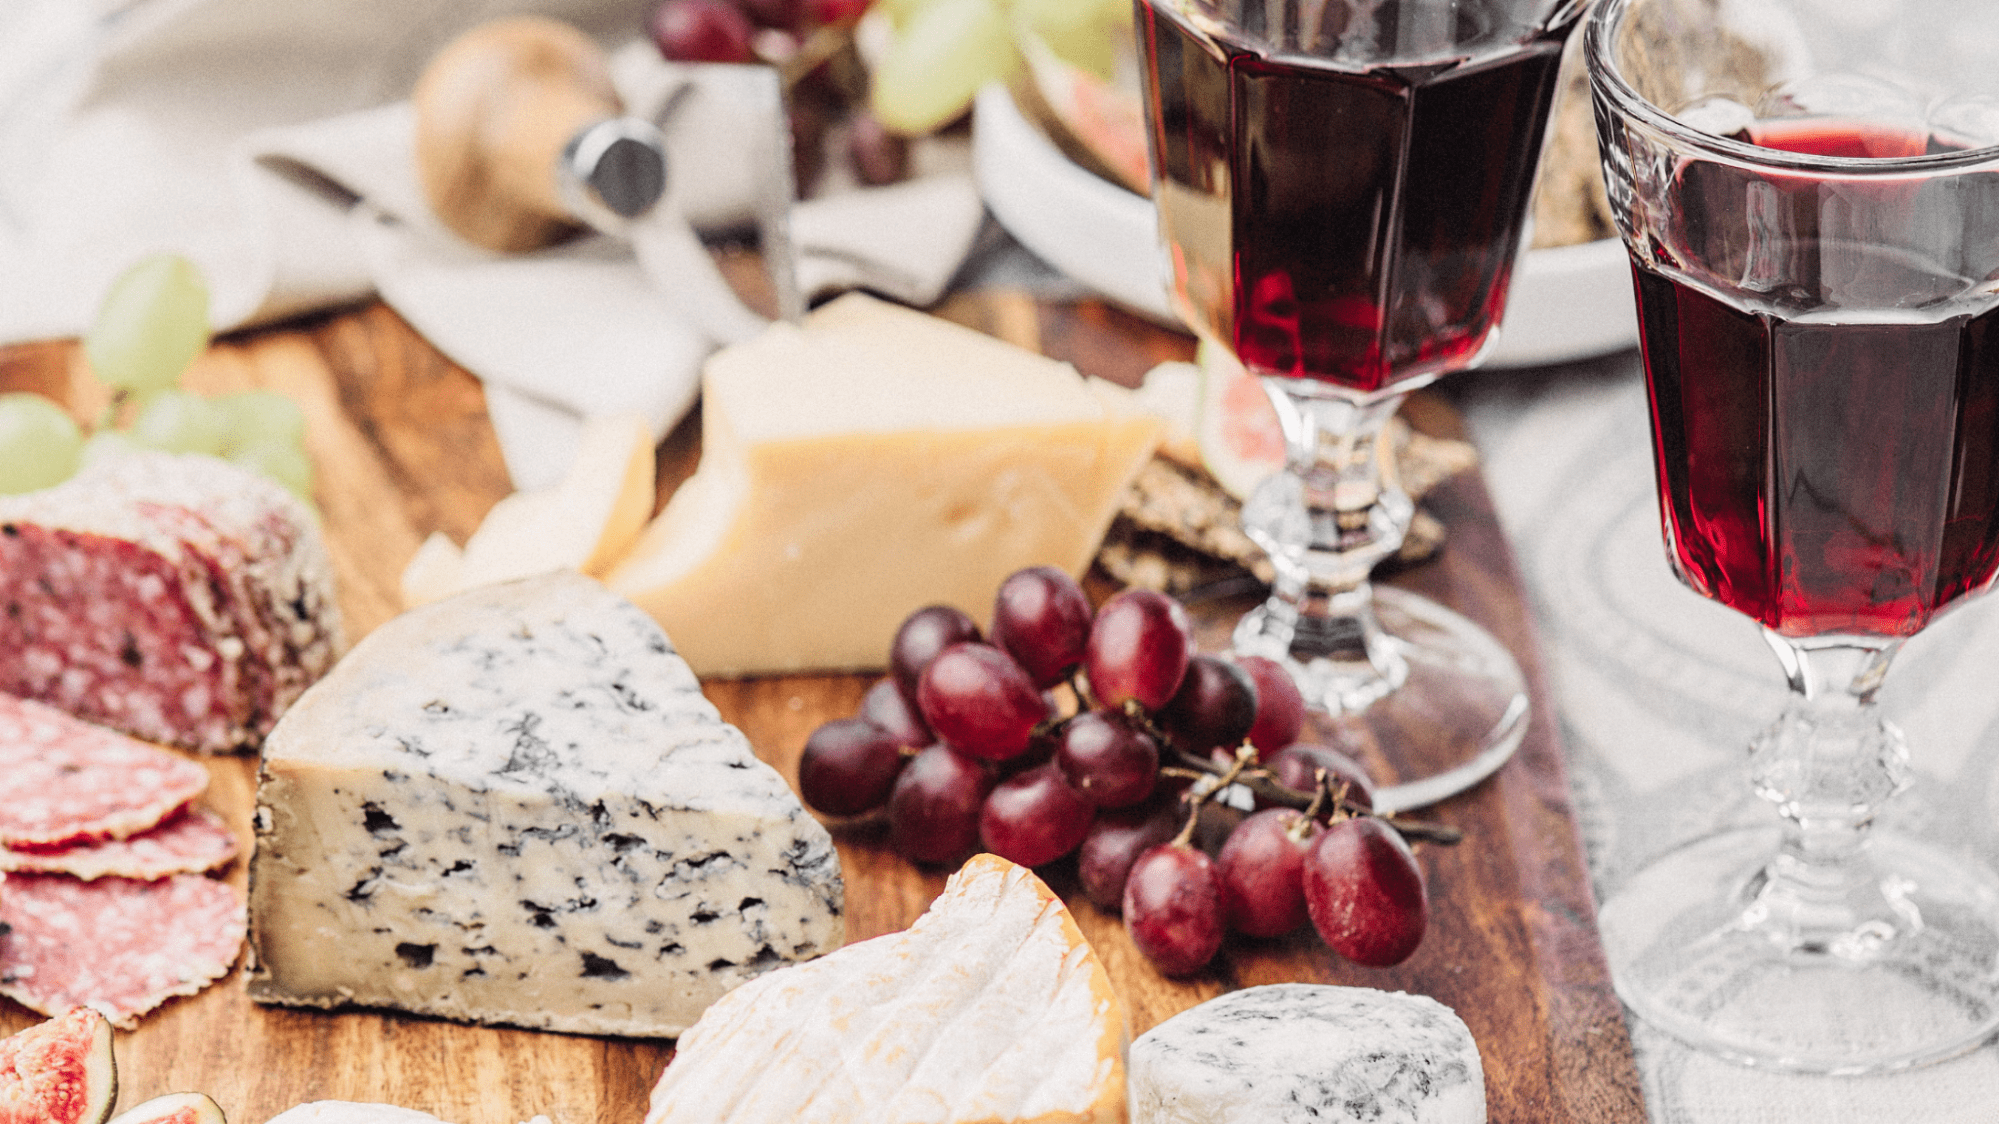 Red wine and a charcuterie board